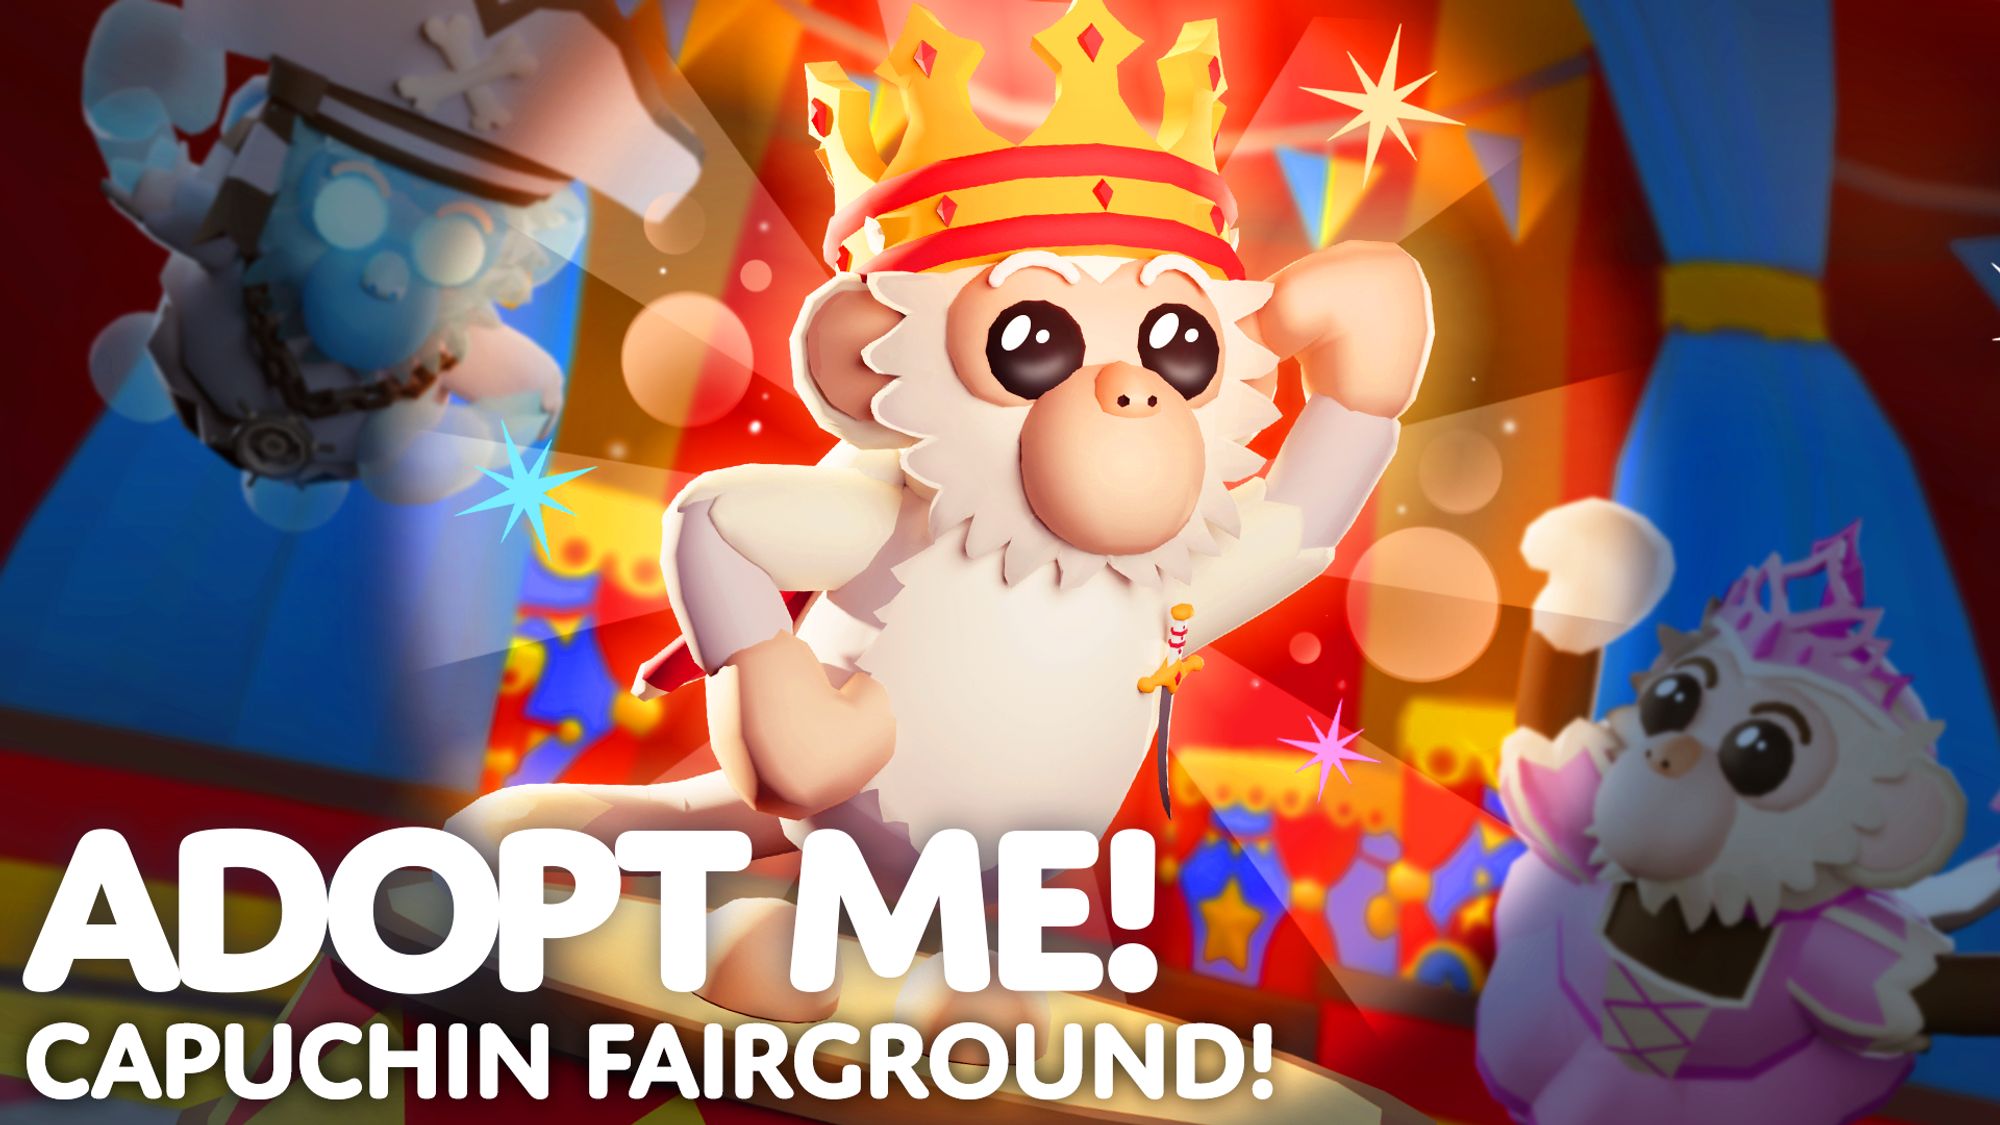 Royal Capuchin Monkey, Princess Capuchin Monkey and Pirate Ghost Capuchin Monkey welcome you to the Traveling Capuchin Fairground update in Adopt Me!